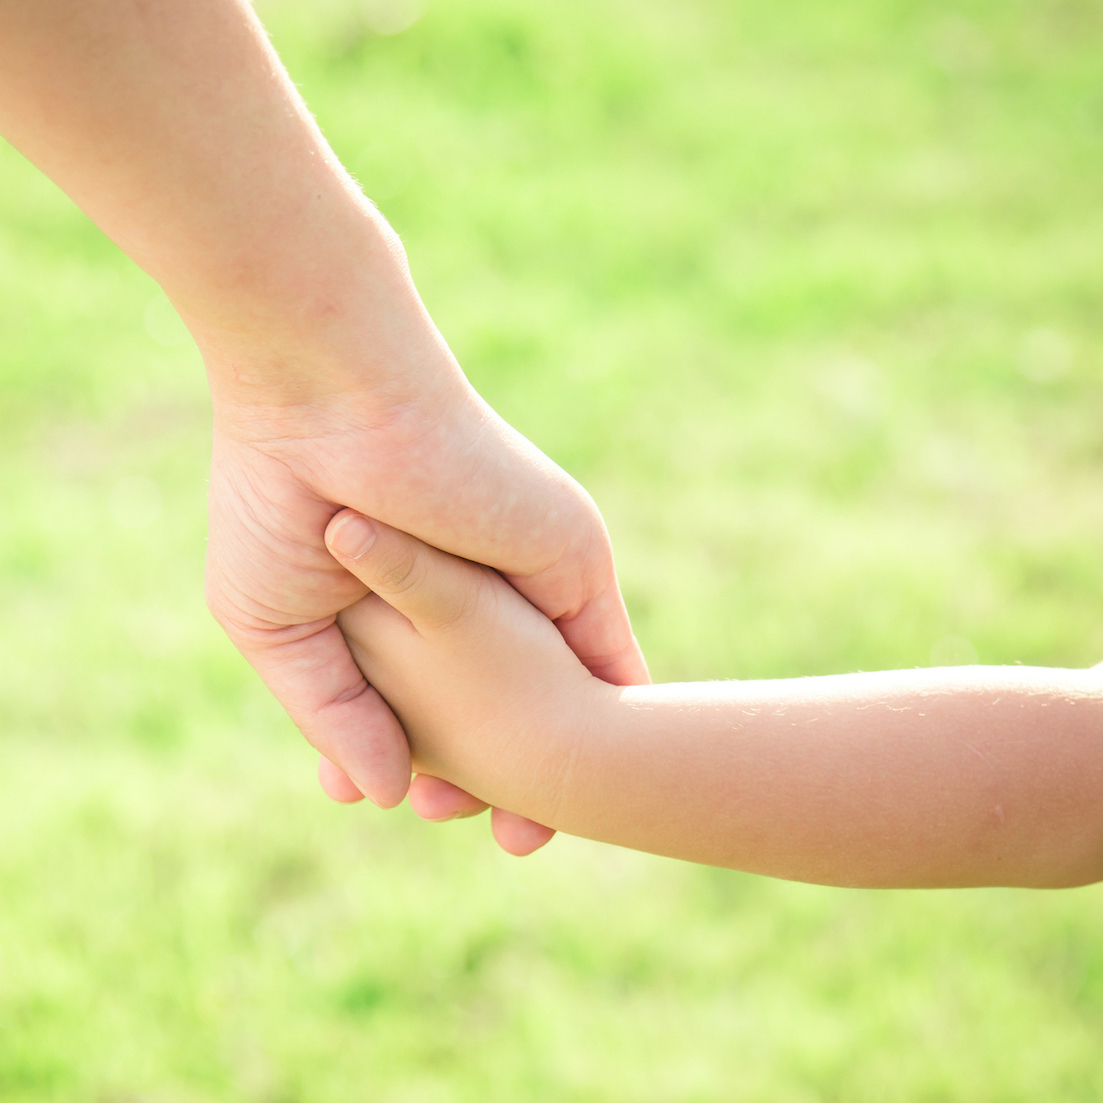 Close-up of mother and son holding hands on grass outdoors